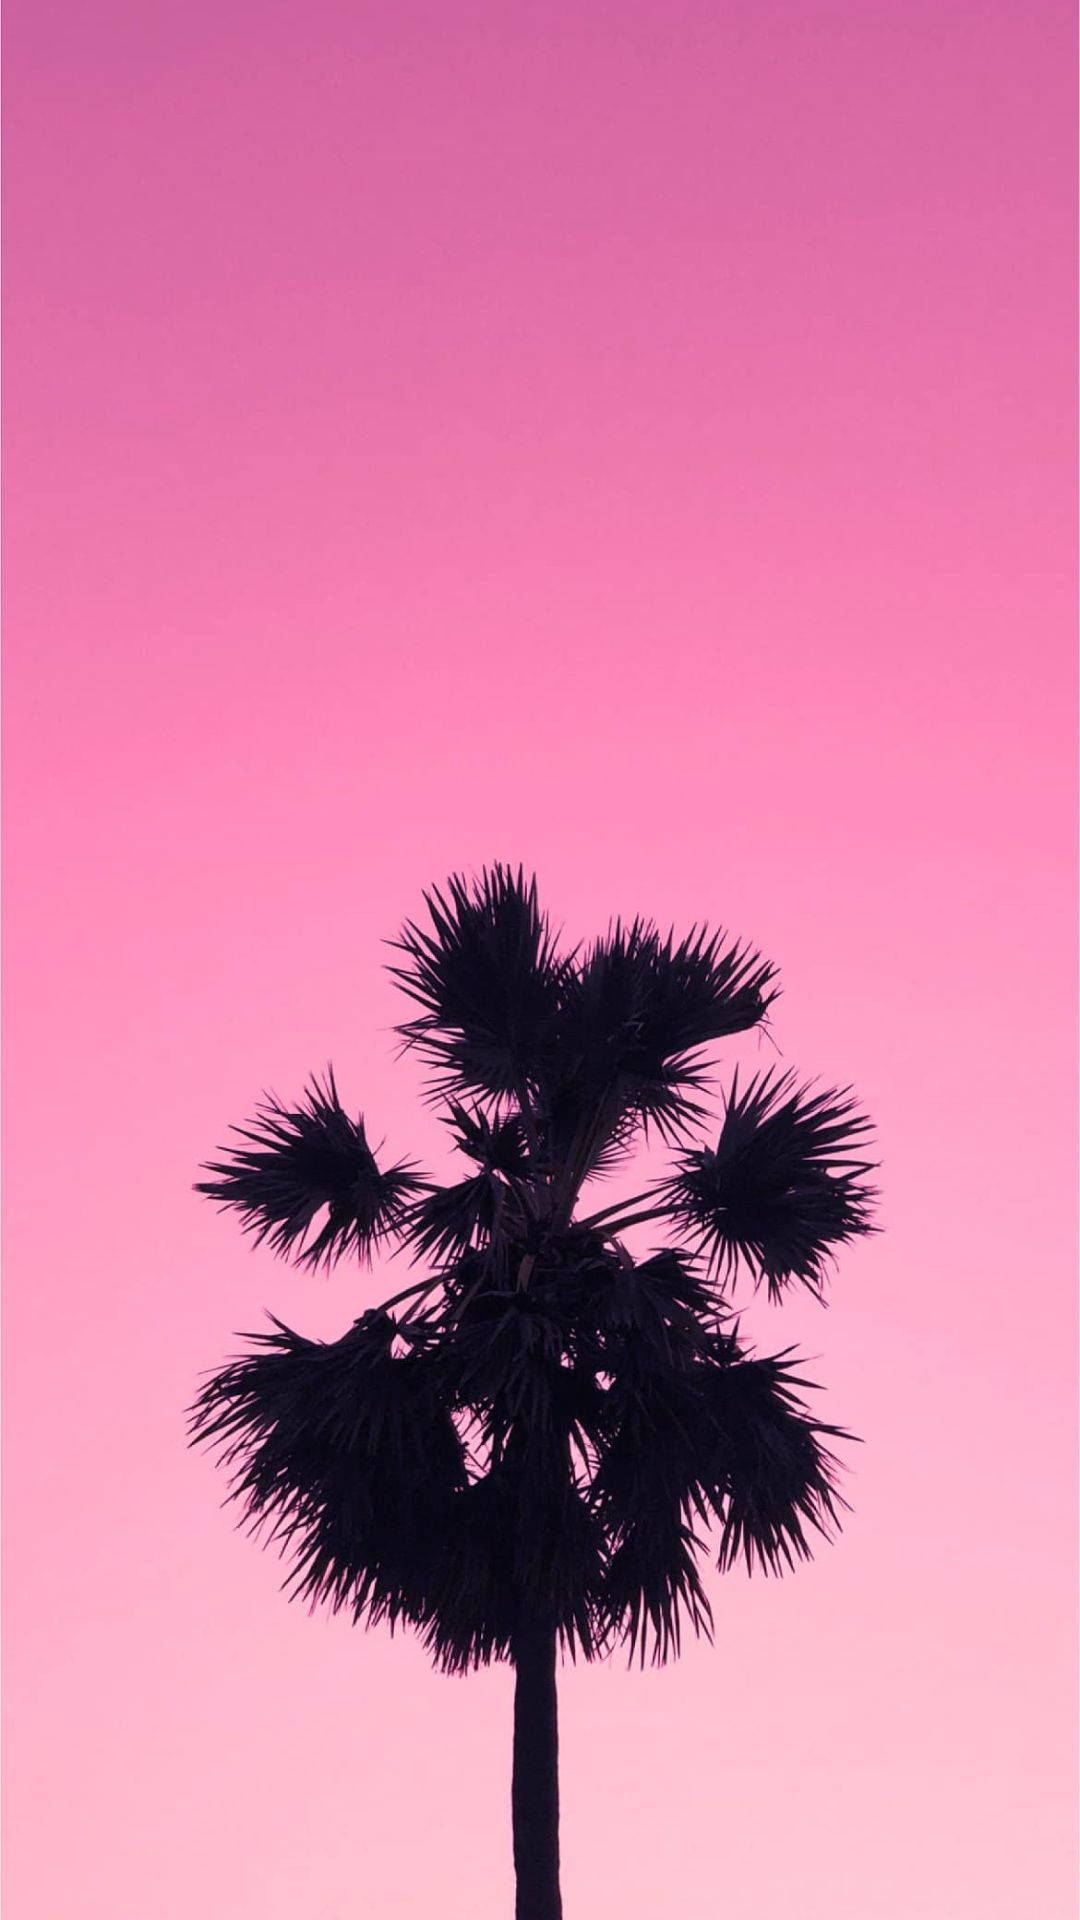 Palm Tree On Aesthetic Pink Sky